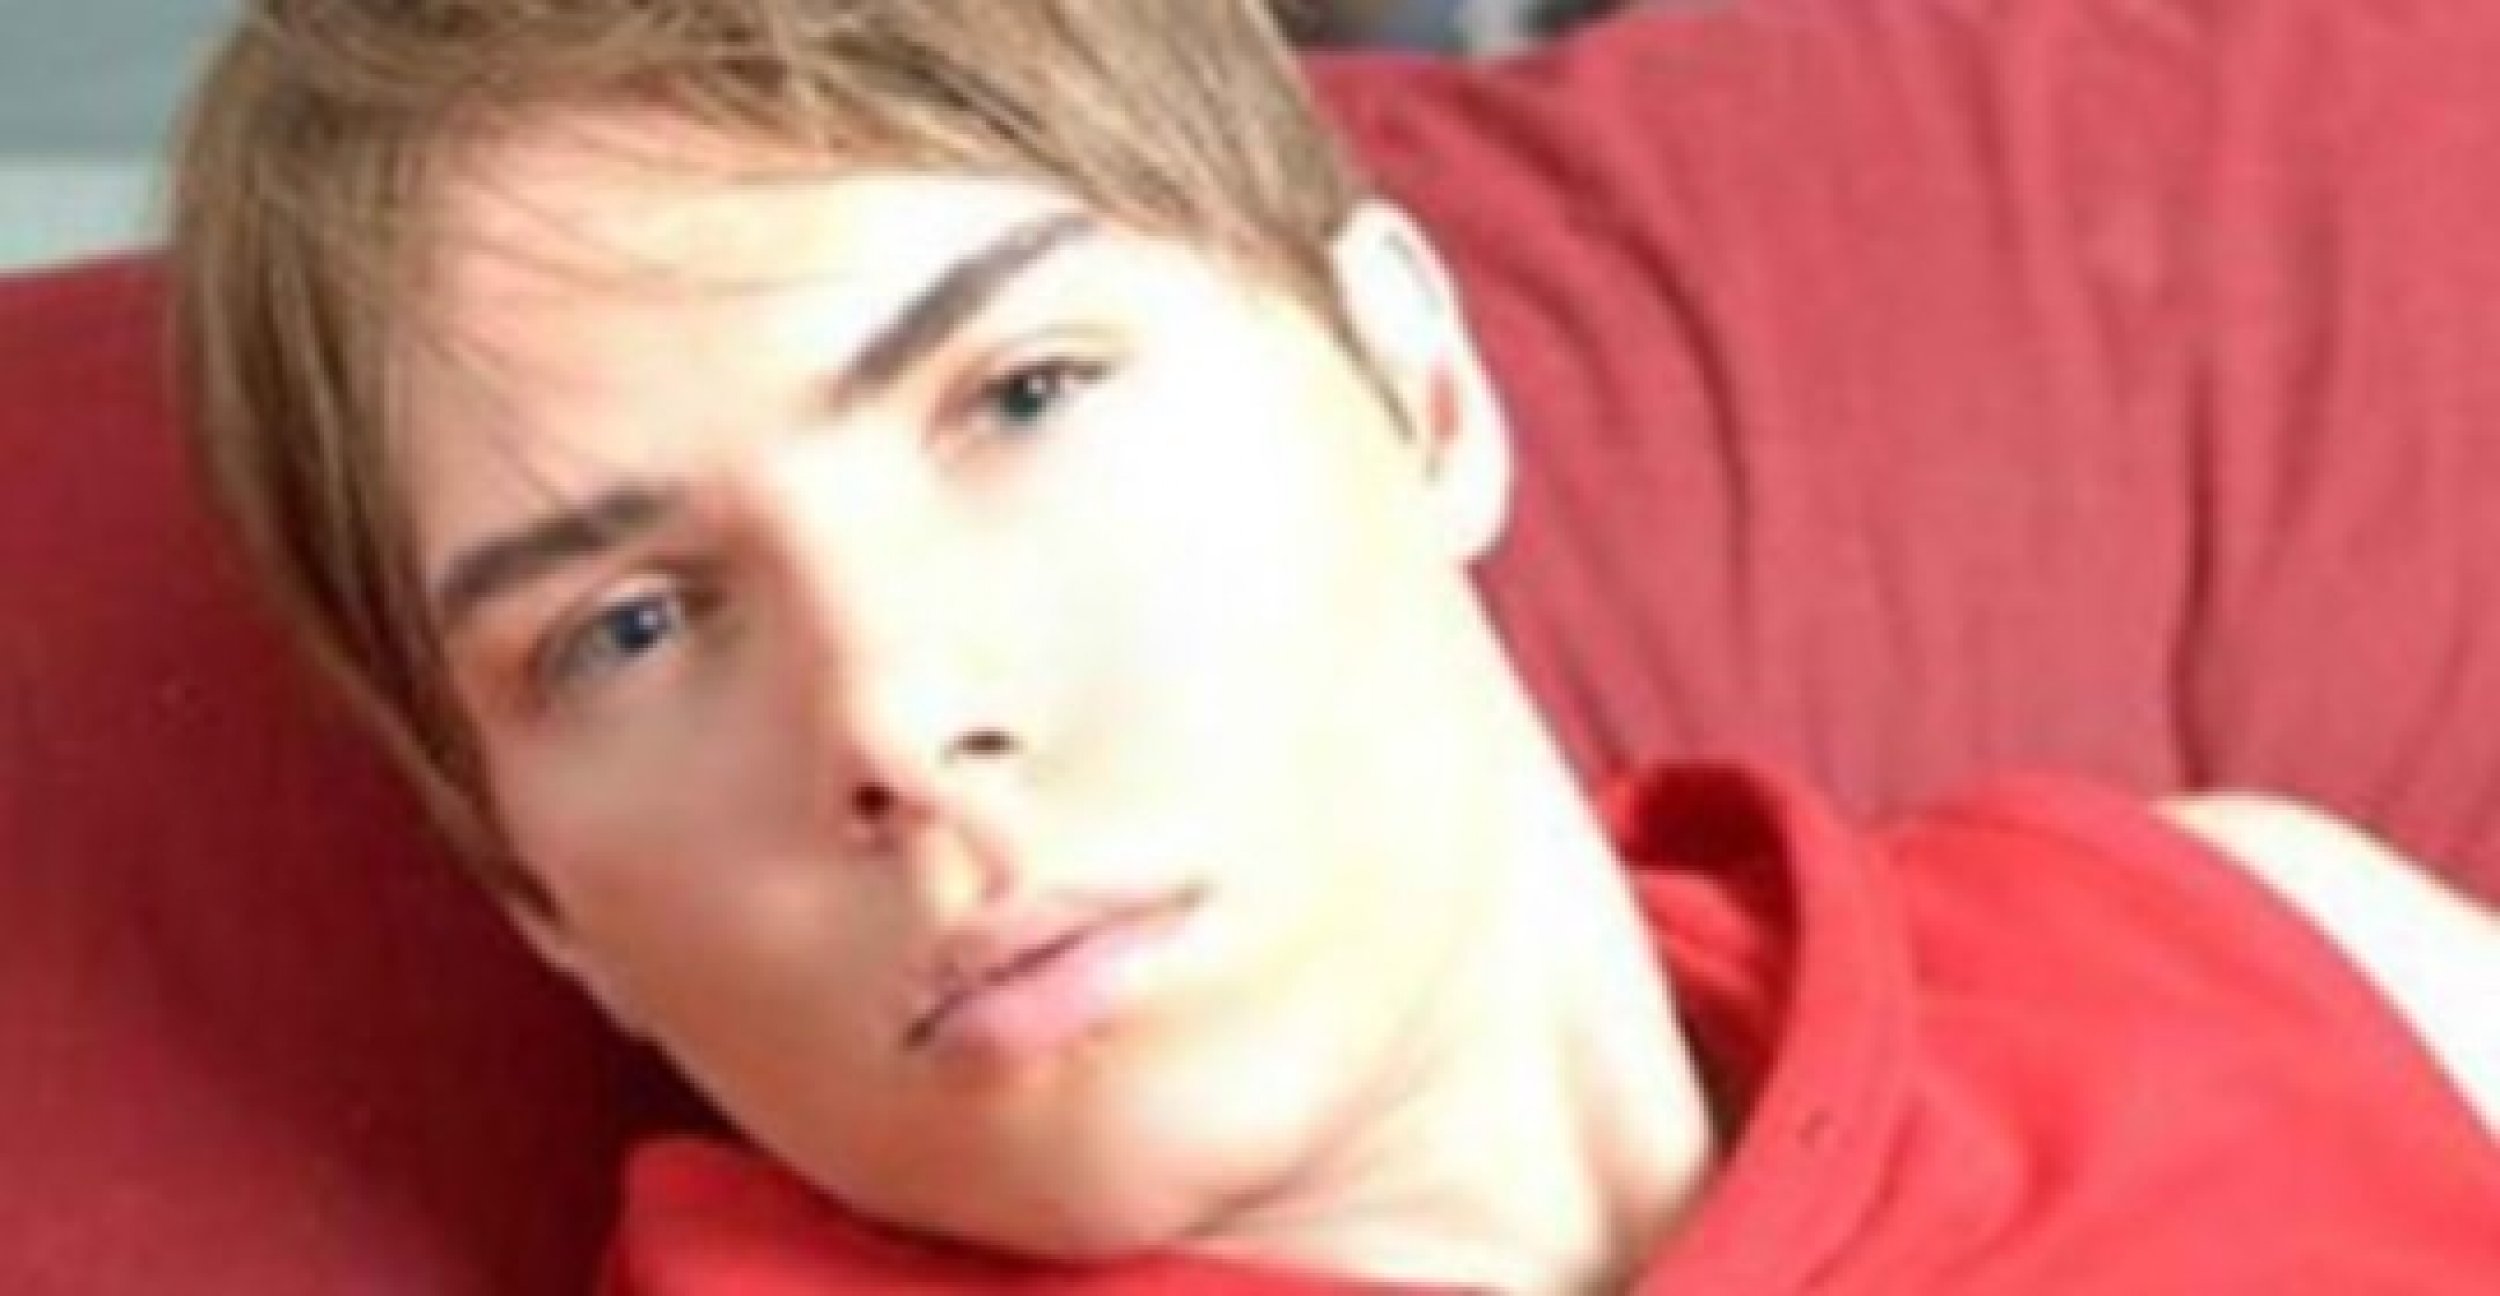 Luka Rocco Magnotta, 'Canadian Psycho,' To Appear in German Court And